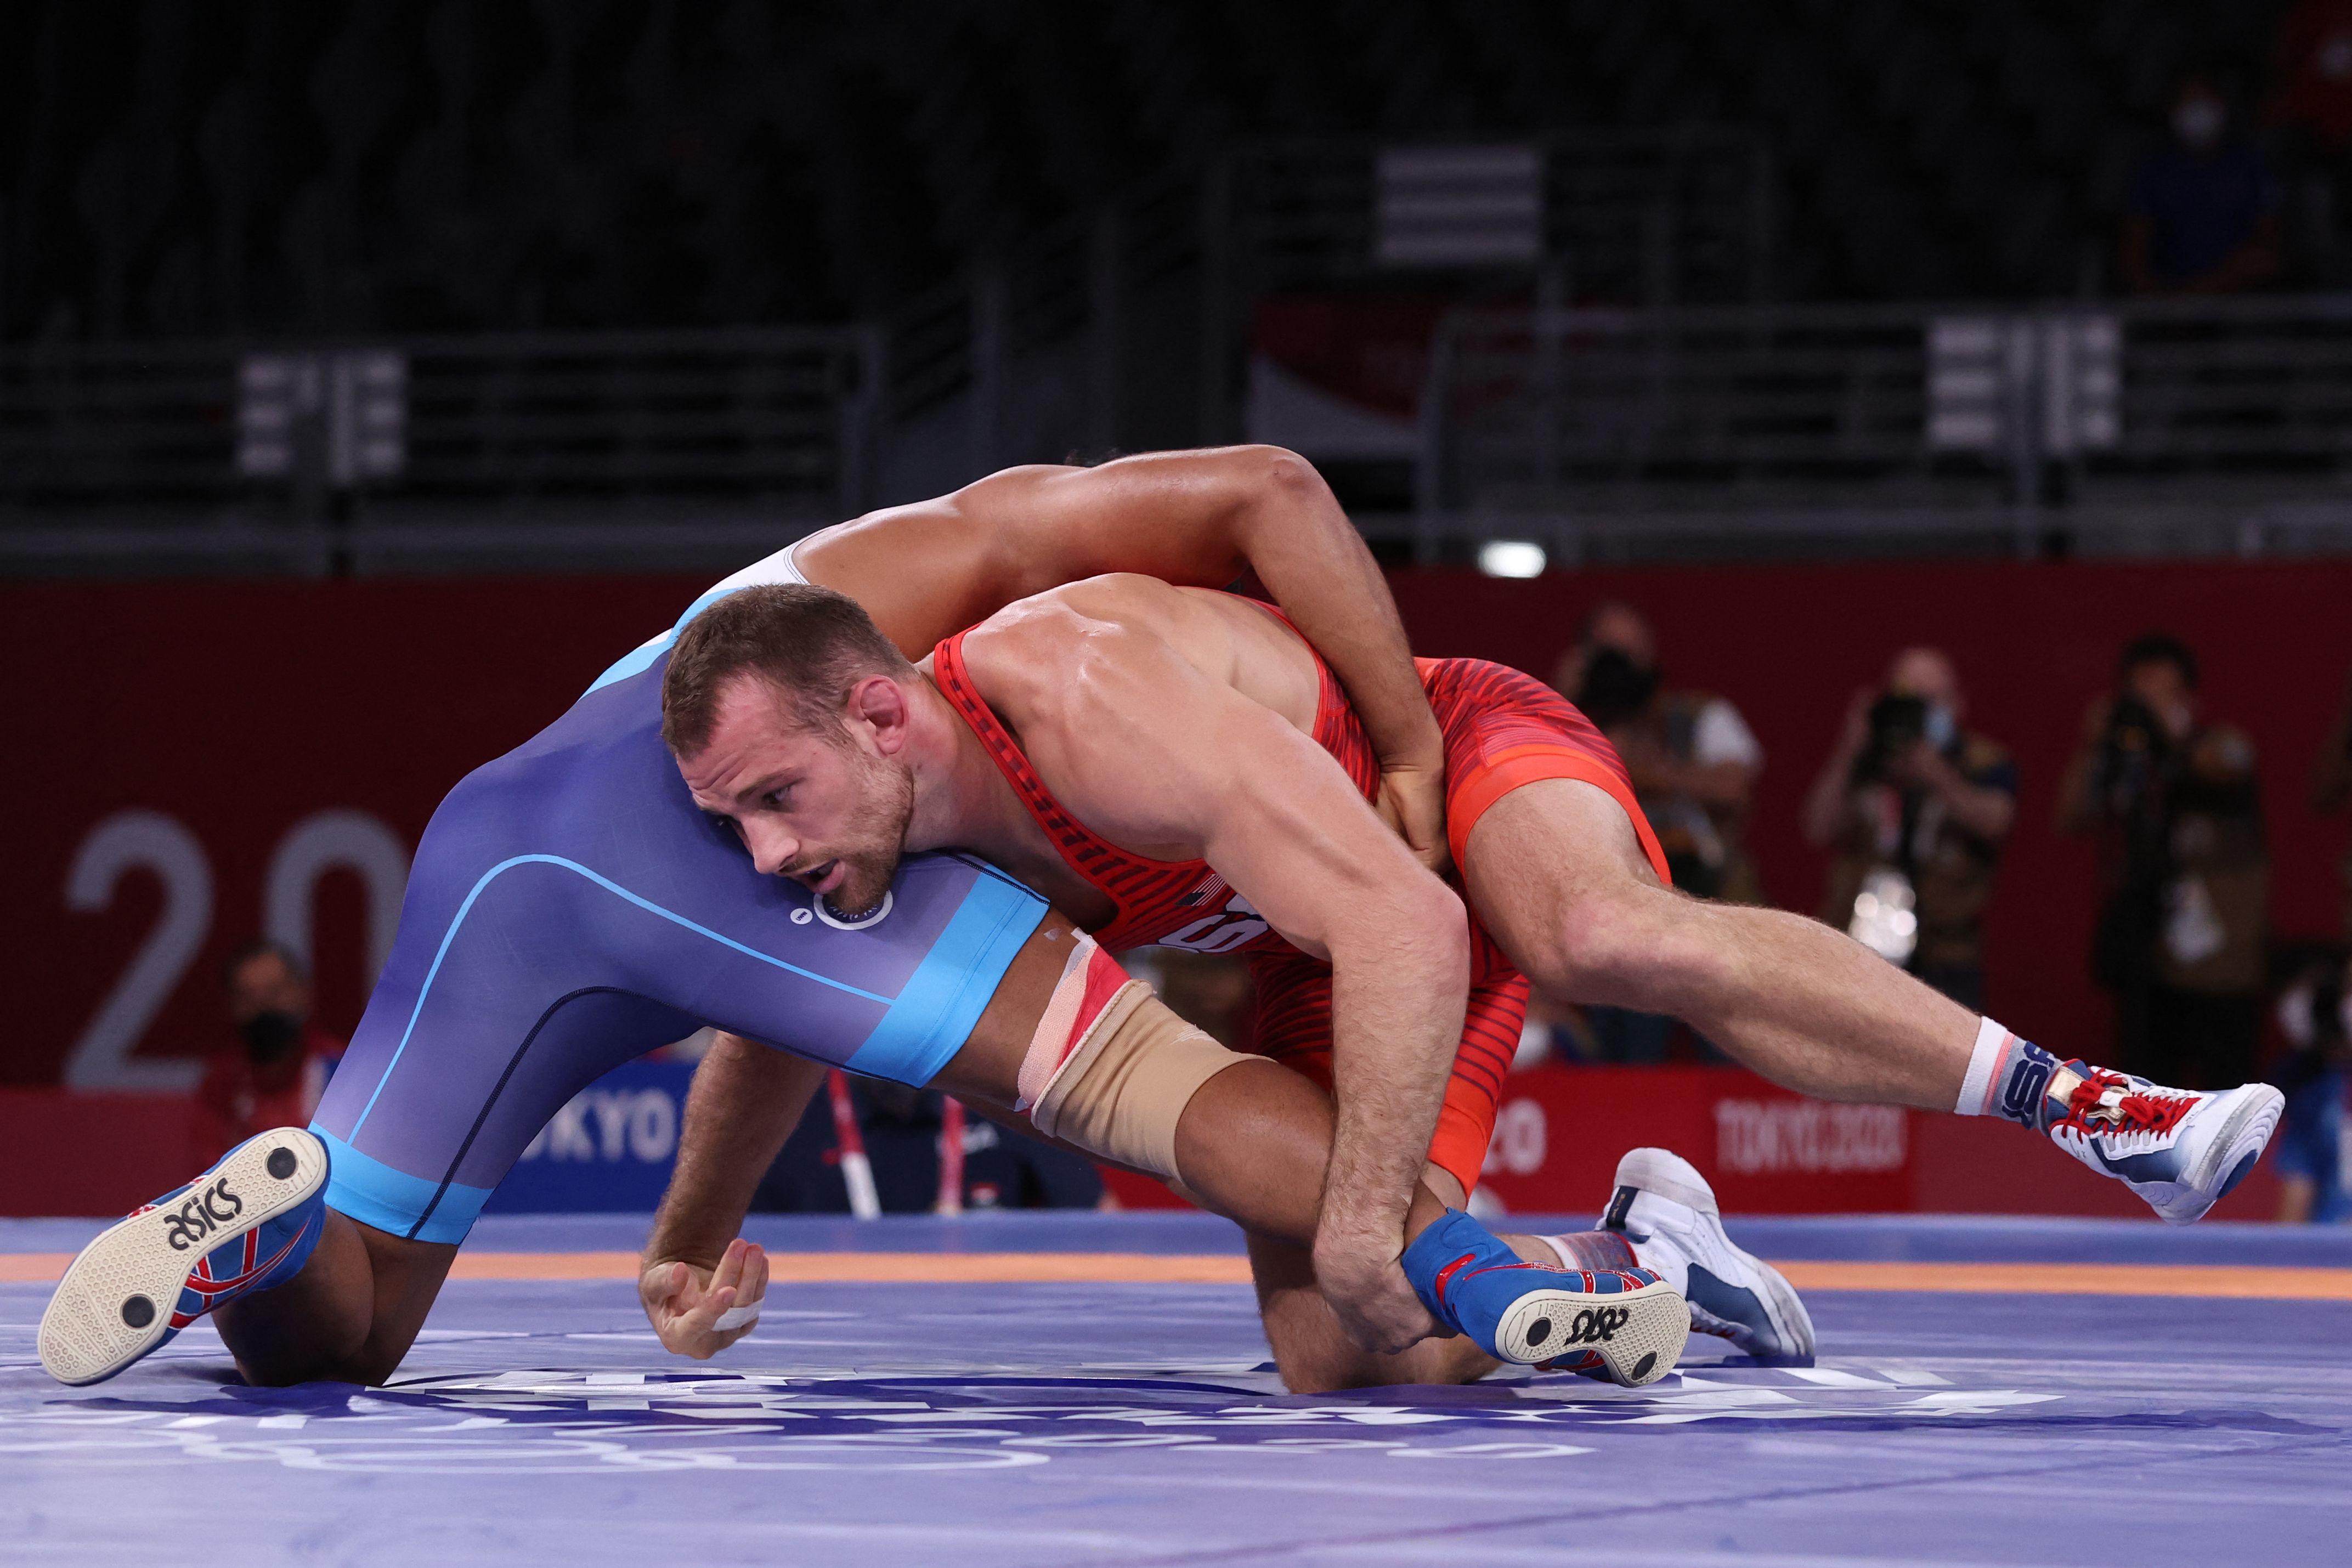 David Taylor Reaches Olympic Wrestling Final; Helen Maroulis Loses Semifinal